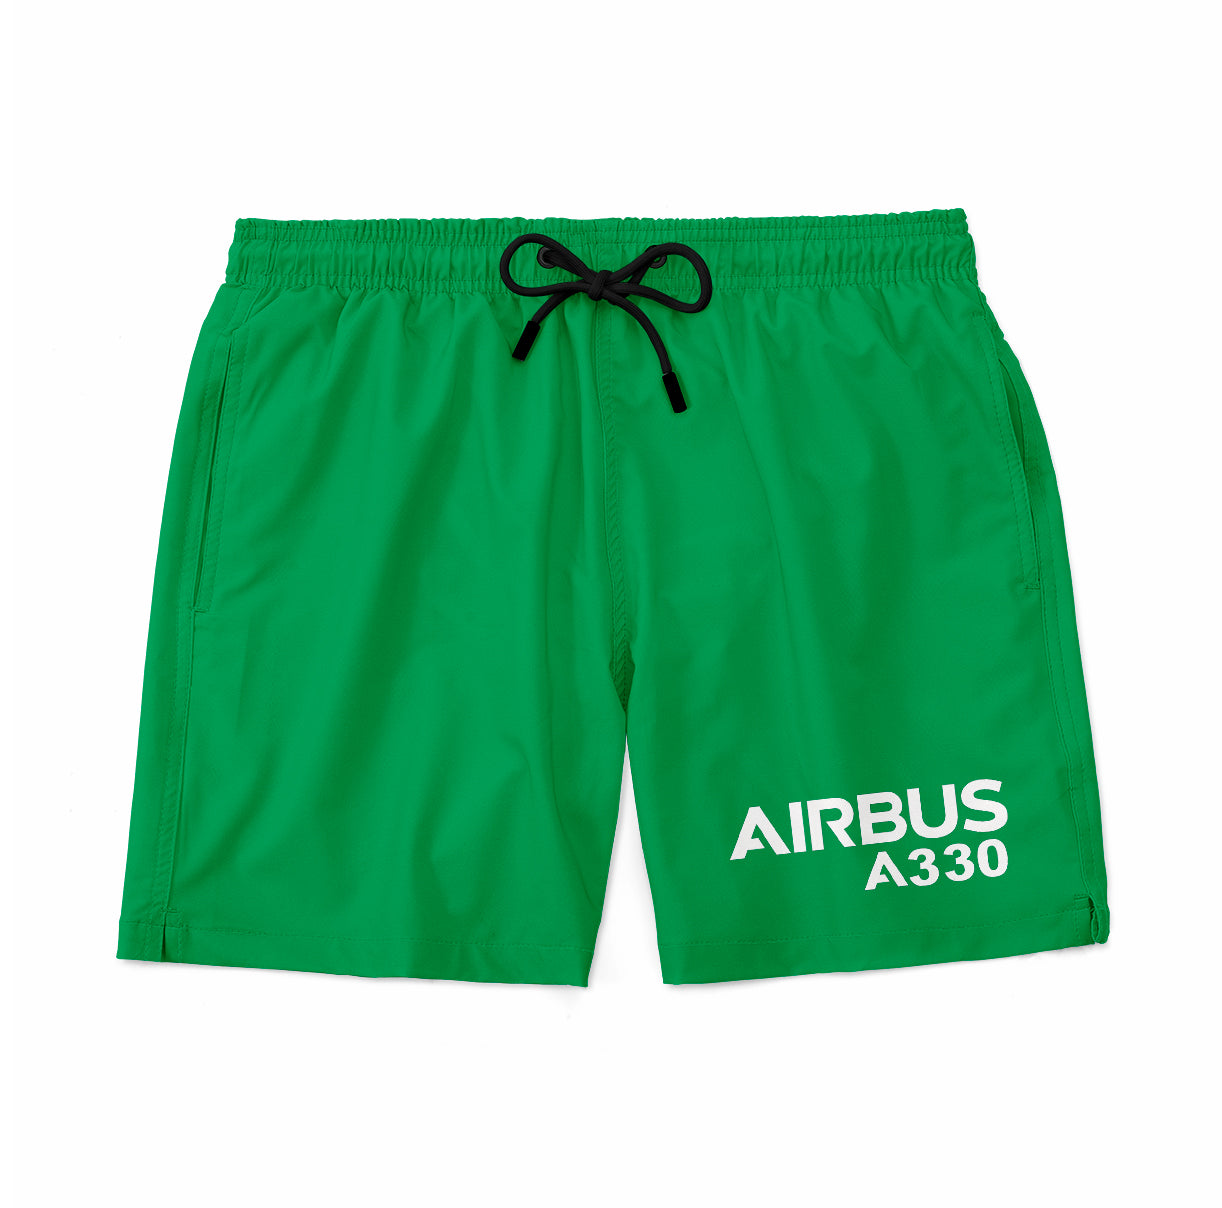 Airbus A330 & Text Designed Swim Trunks & Shorts